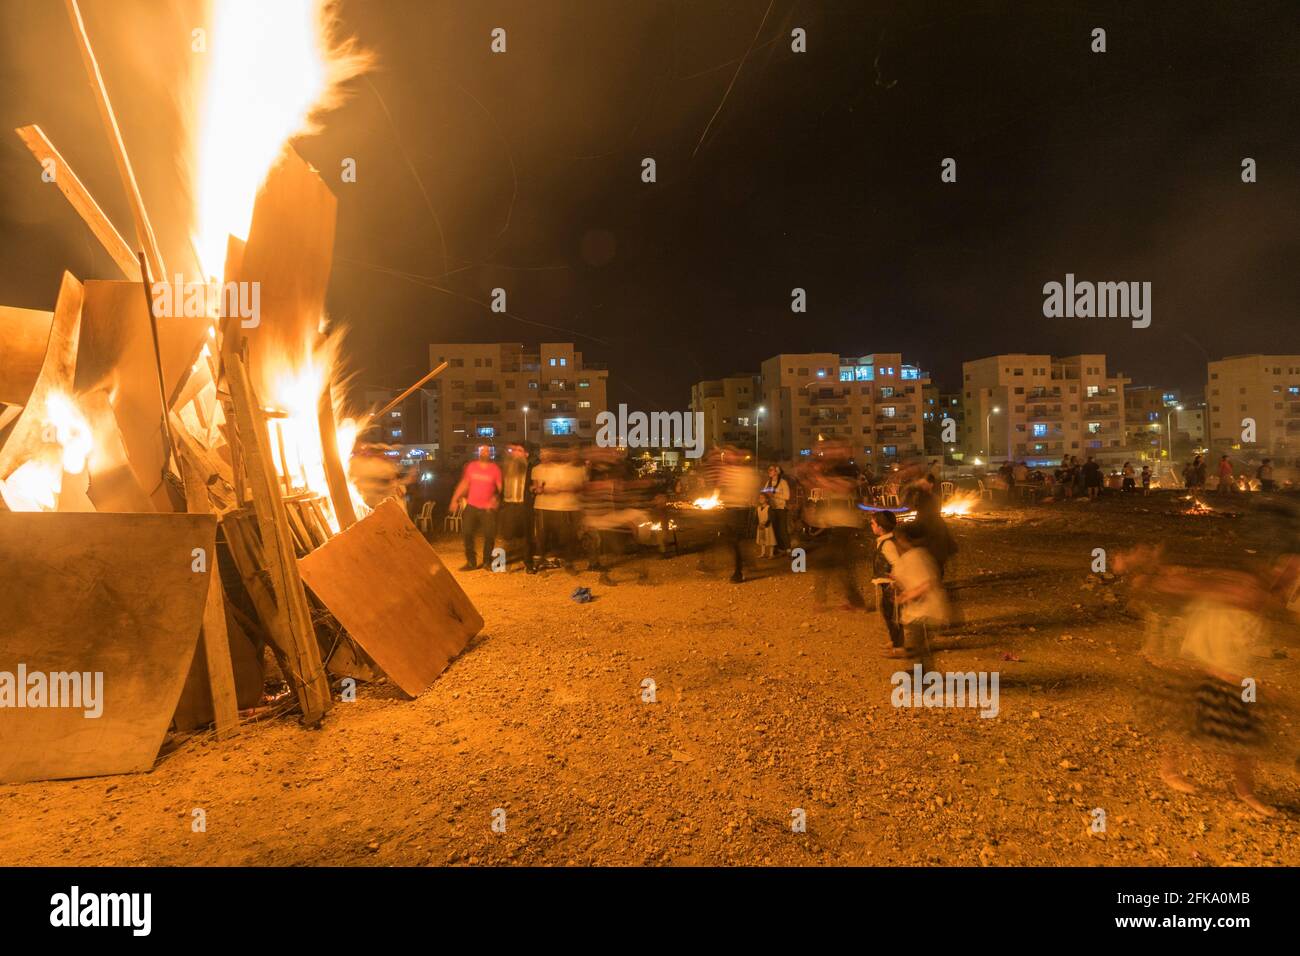 People dance around a fire during the Jewish Holiday of Lag Ba'Omer, which takes place every  18th of Hebrew month Iyar. It is customary during this holiday to make fires. This year, due to fire hazard warning, all fires were concentrated to few sites, hence the large number of pyres. Stock Photo